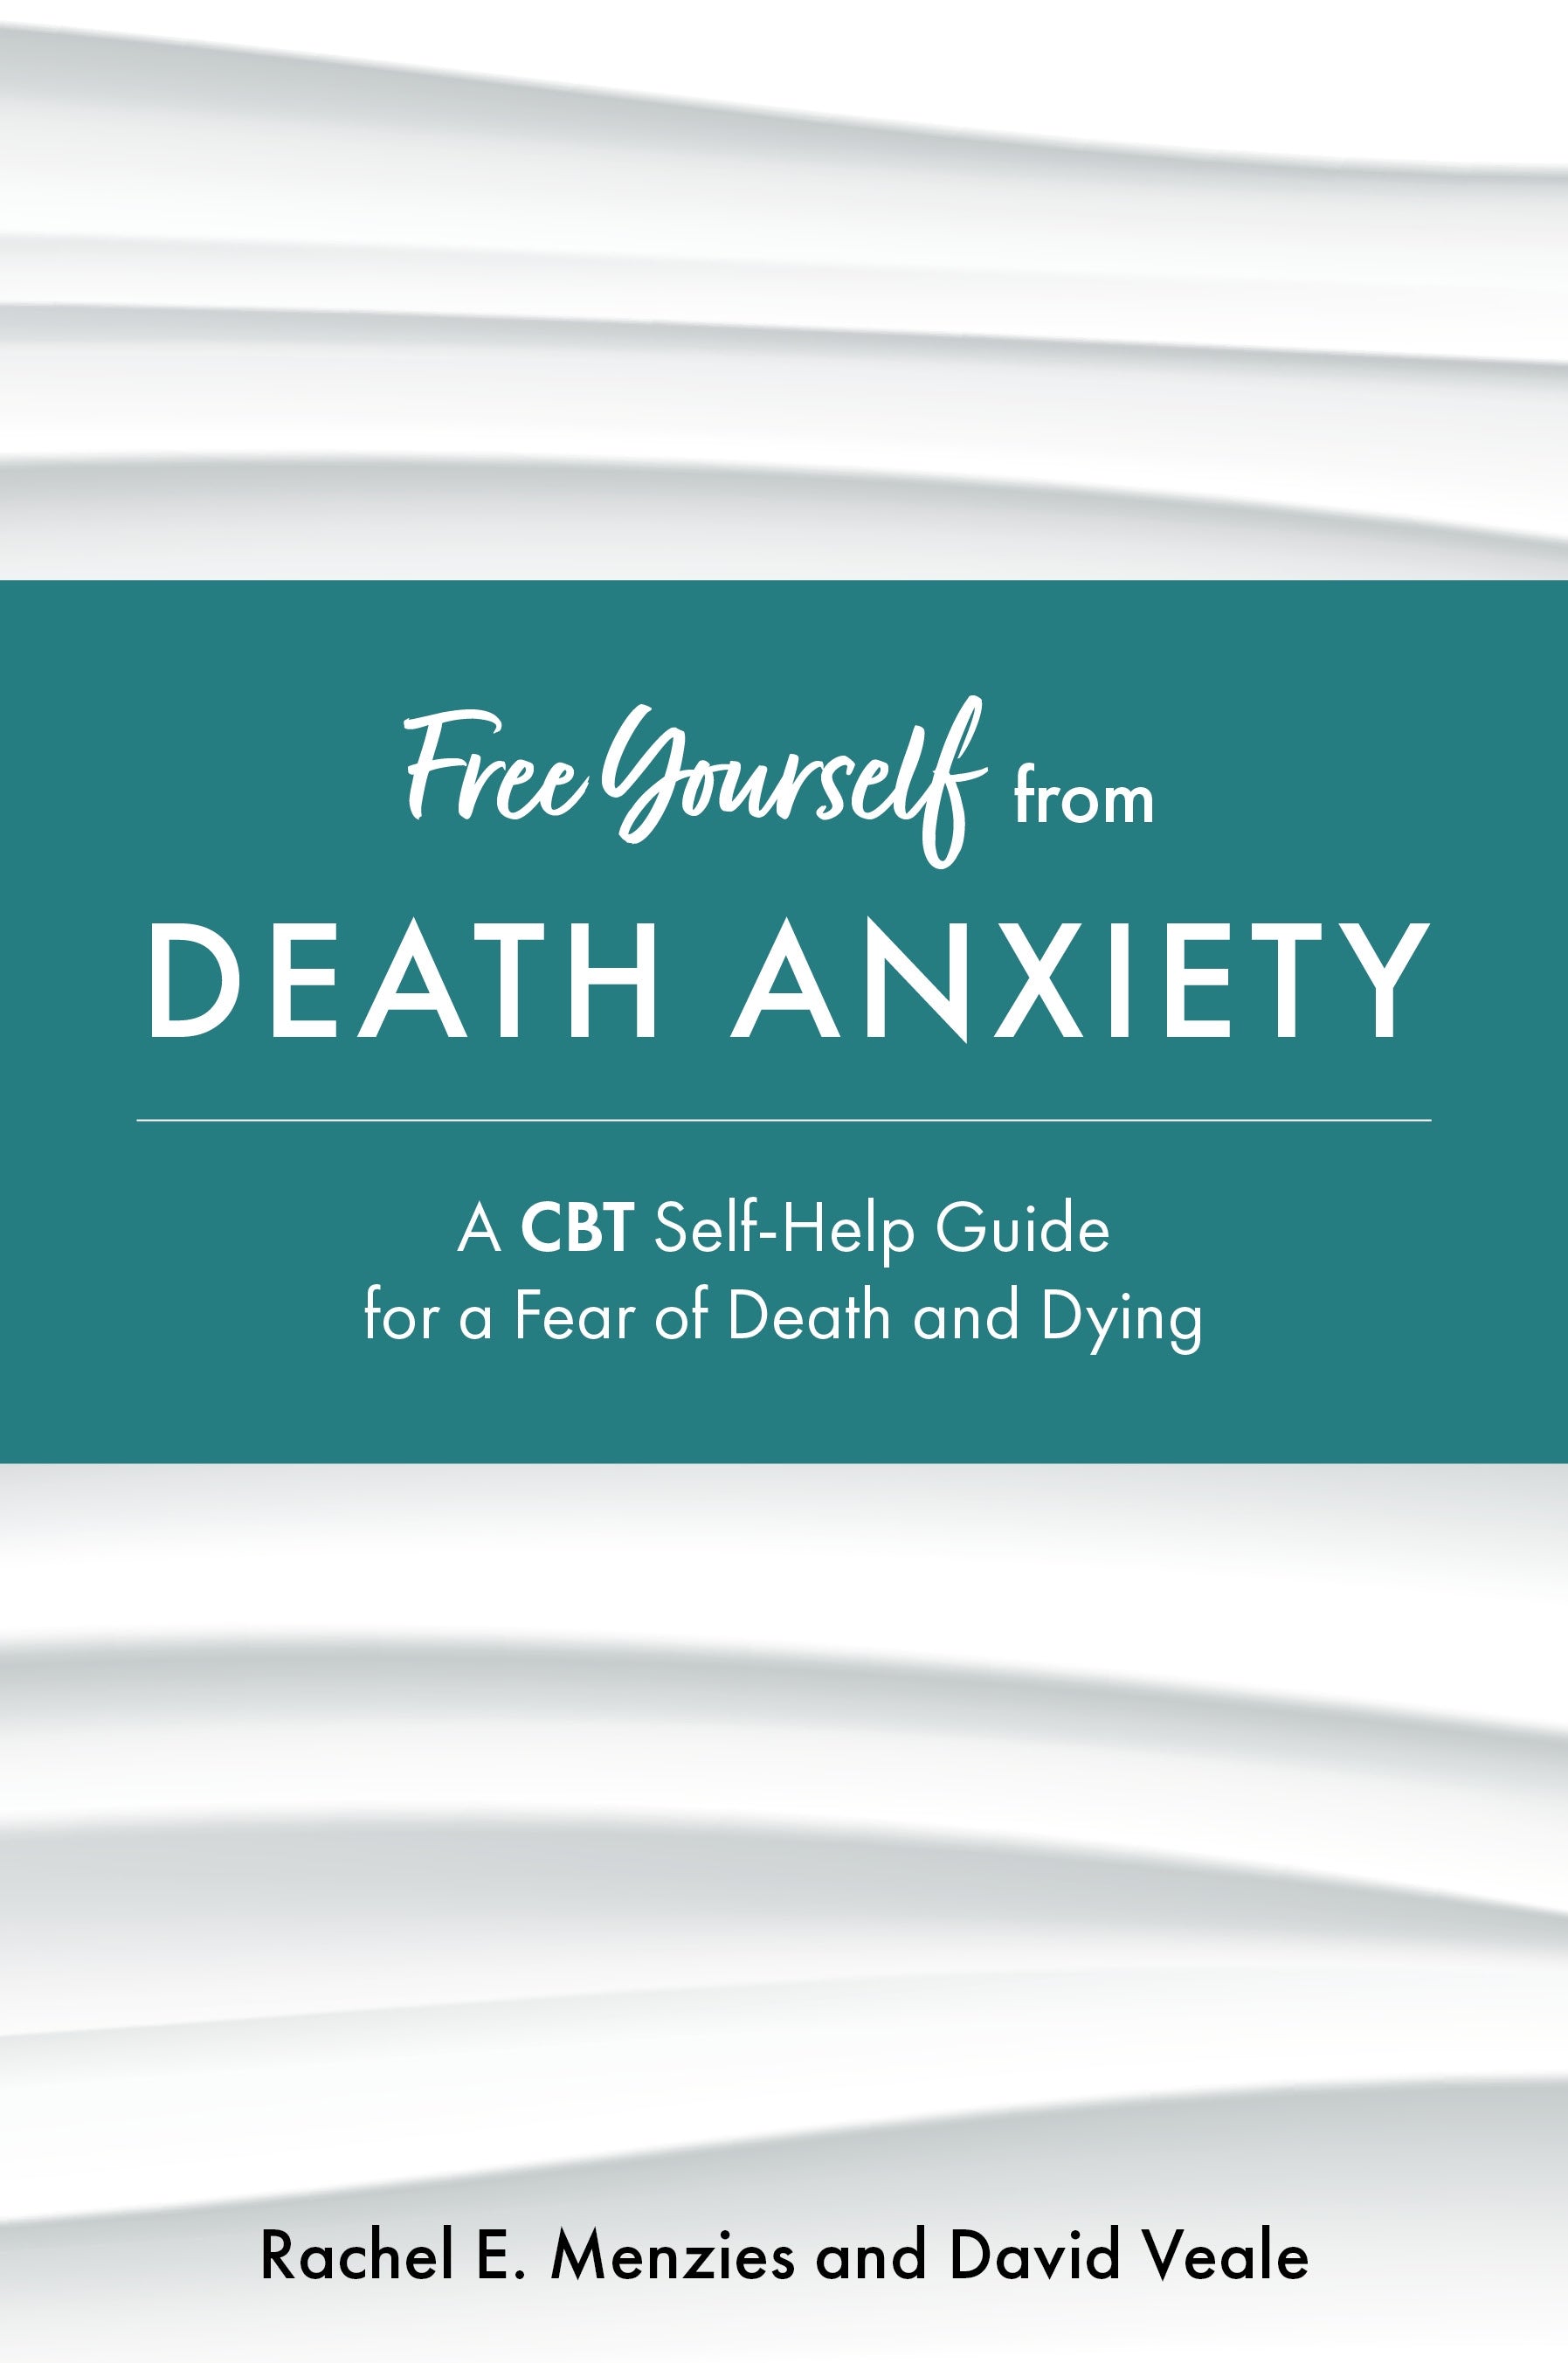 Free Yourself from Death Anxiety by David Veale, Rachel Menzies